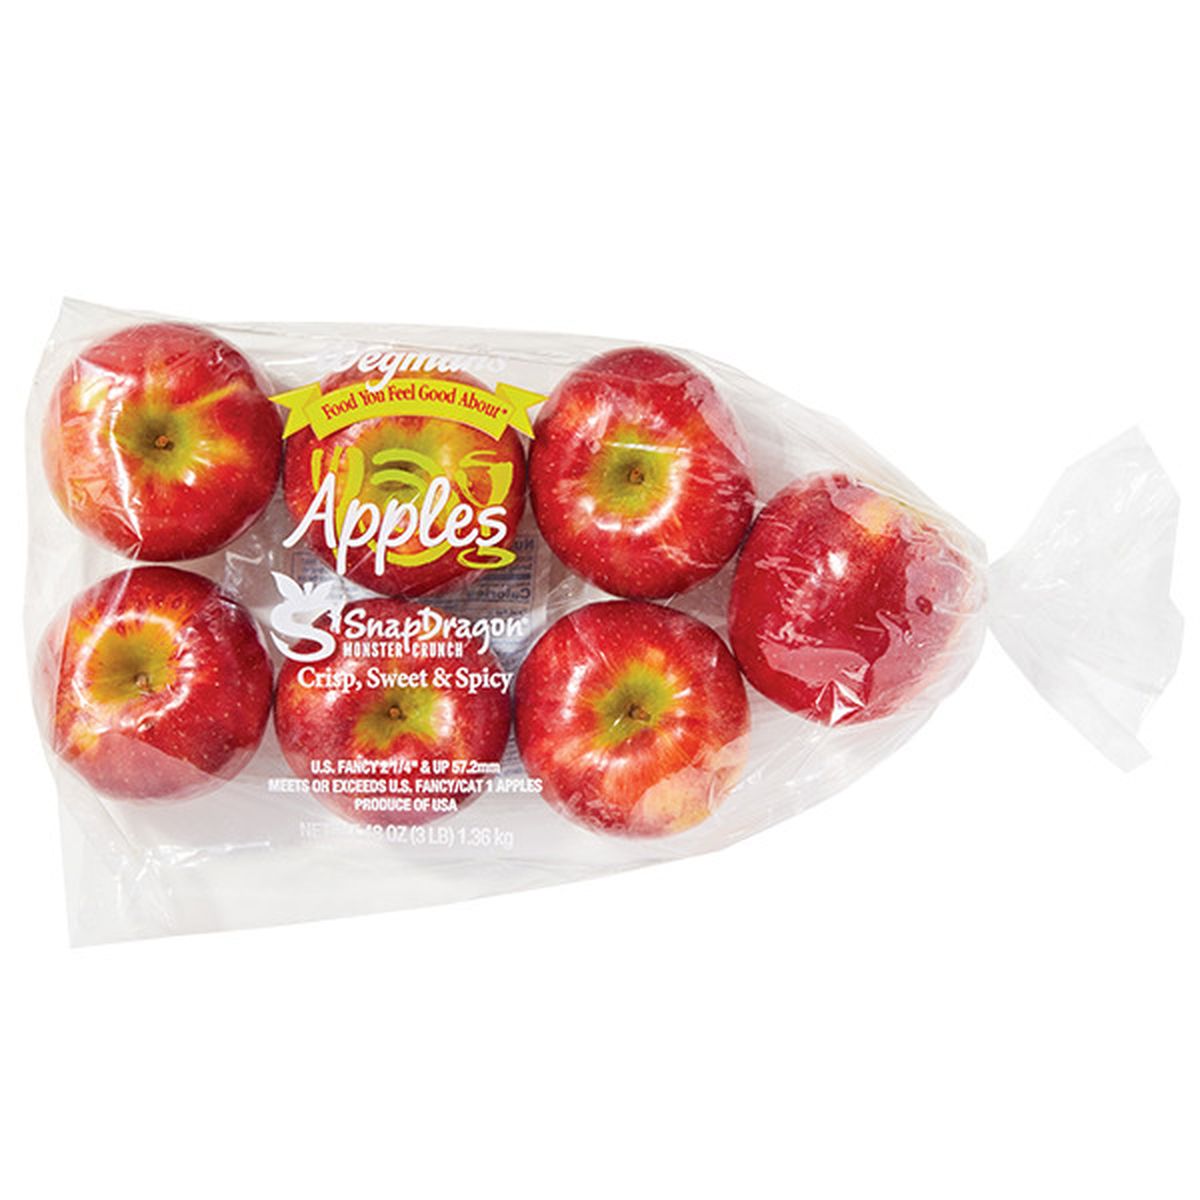 Calories in SnapDragons Apples, Bagged